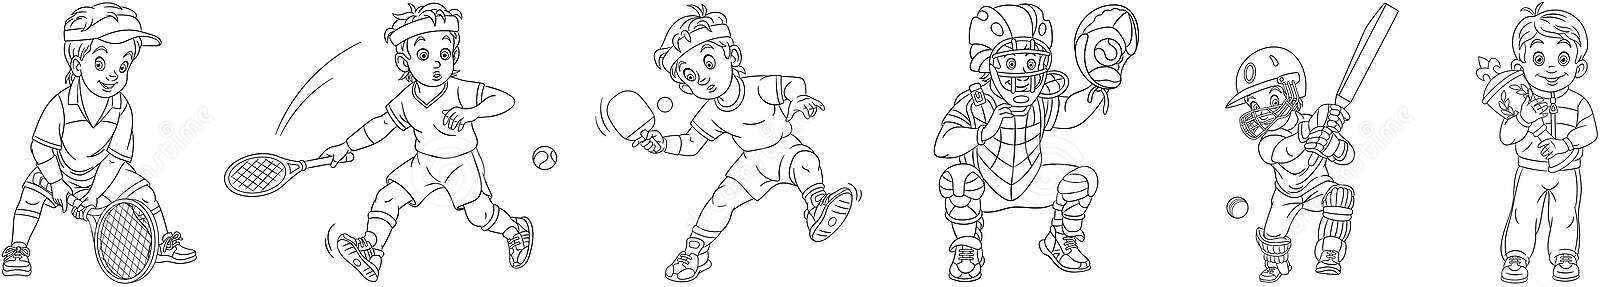 Cricket Game Coloring Page